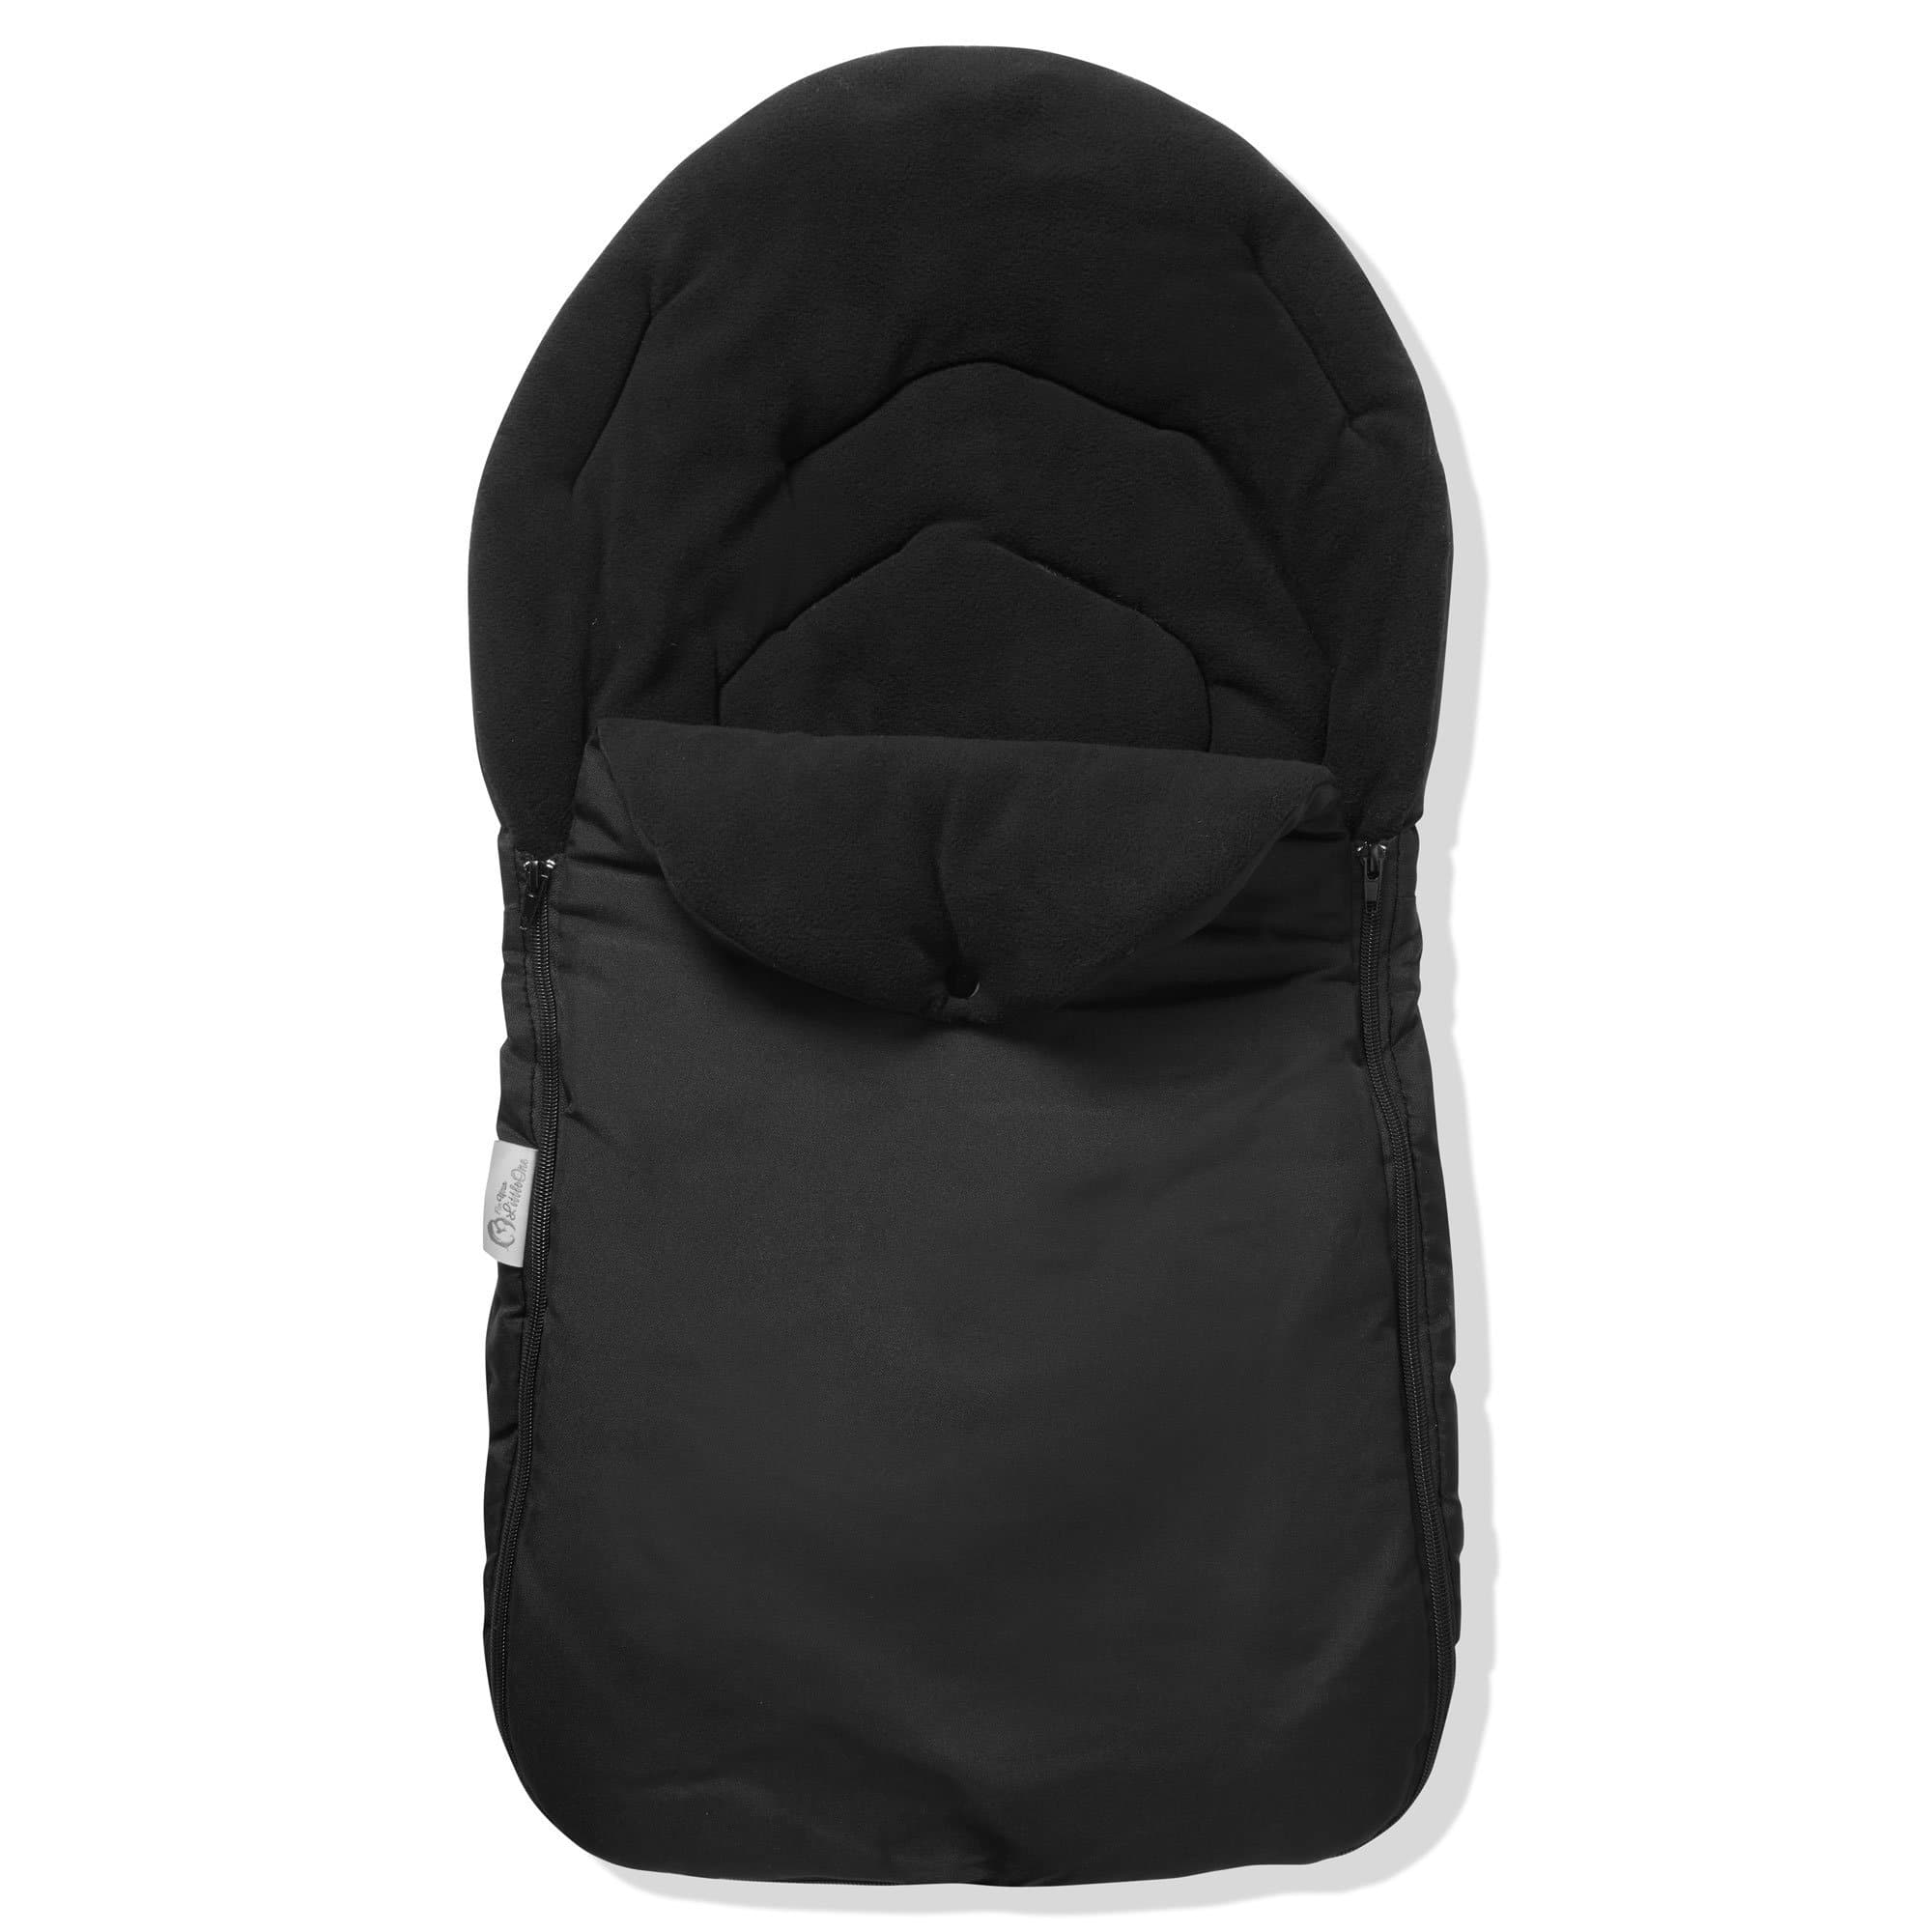 Car Seat Footmuff / Cosy Toes Compatible with Mee-Go - Black / Fits All Models | For Your Little One